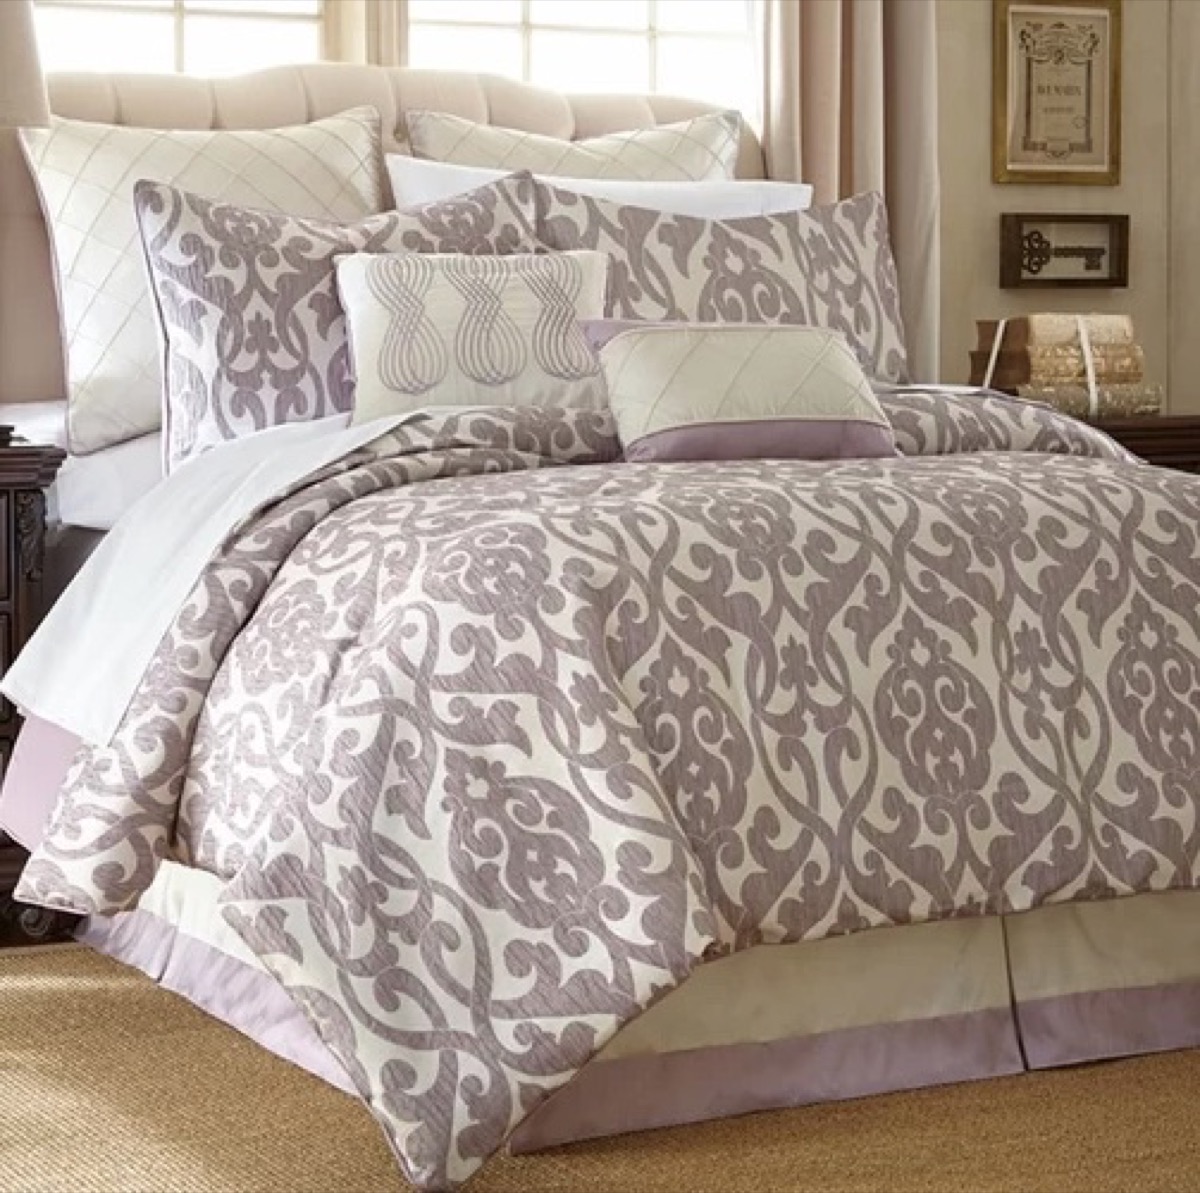 Wayfair Bedding {Save Money on Bed and Bath Items}